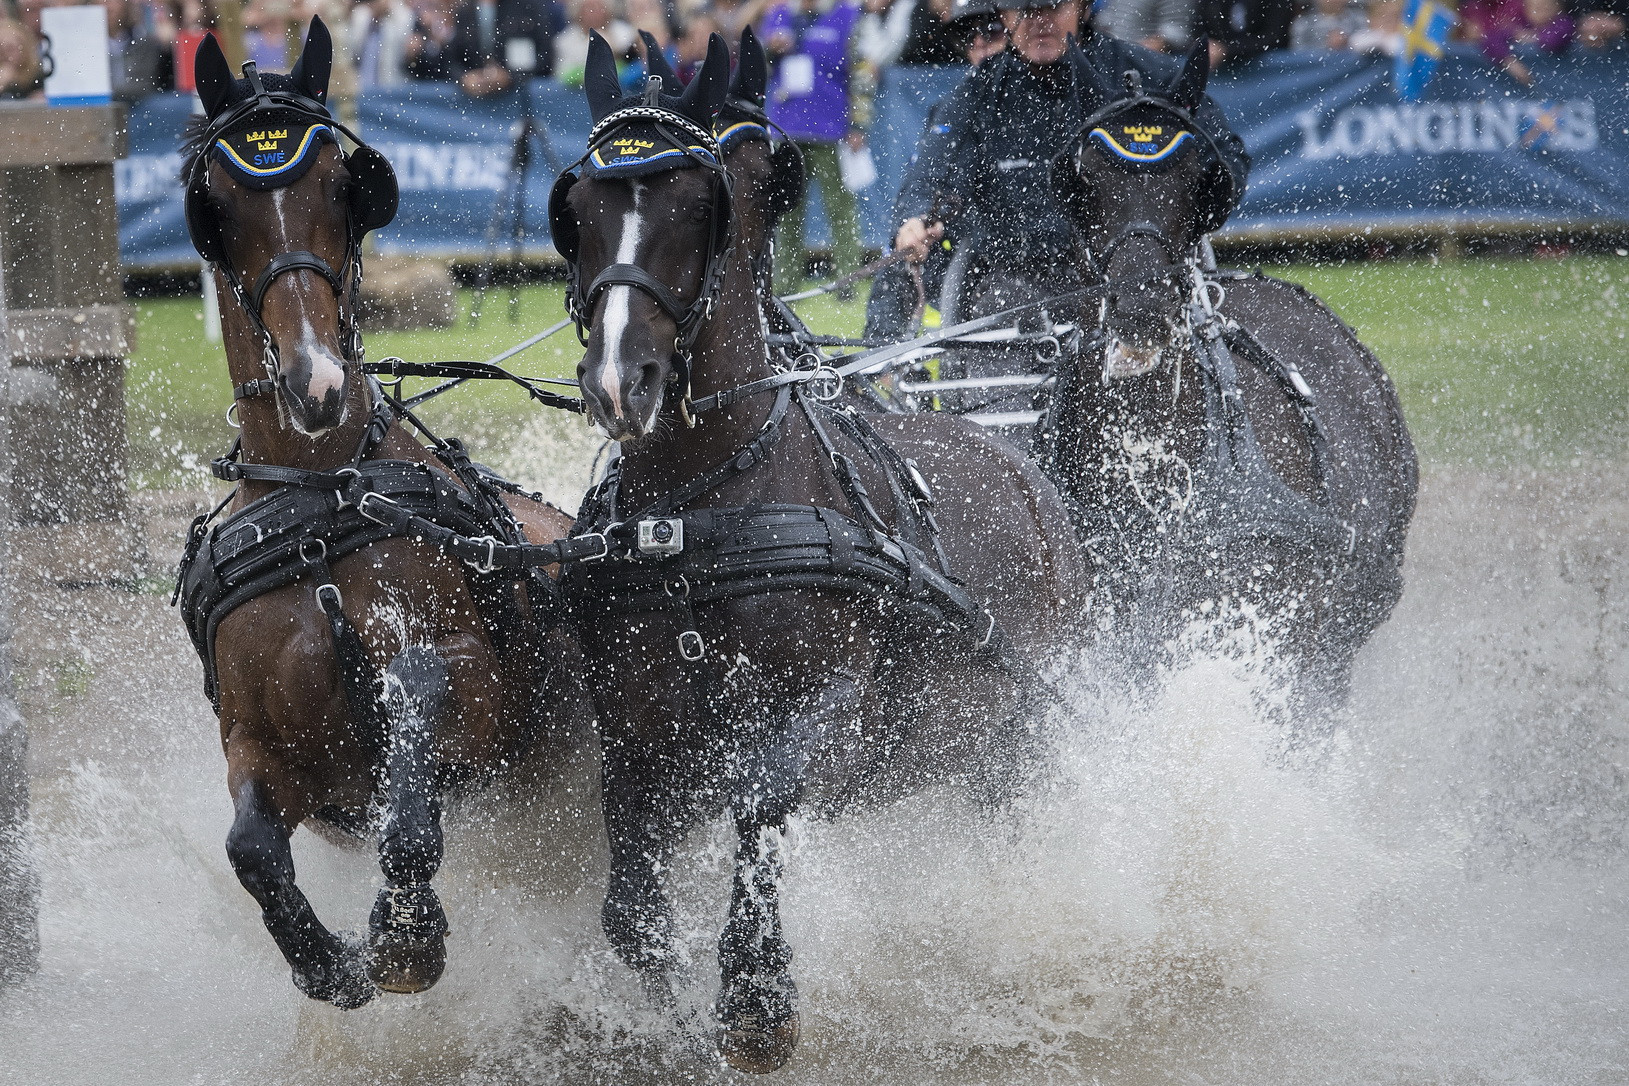 Venues have been announced for 14 events on the equestrian driving calendar up to 2021 ©FEI